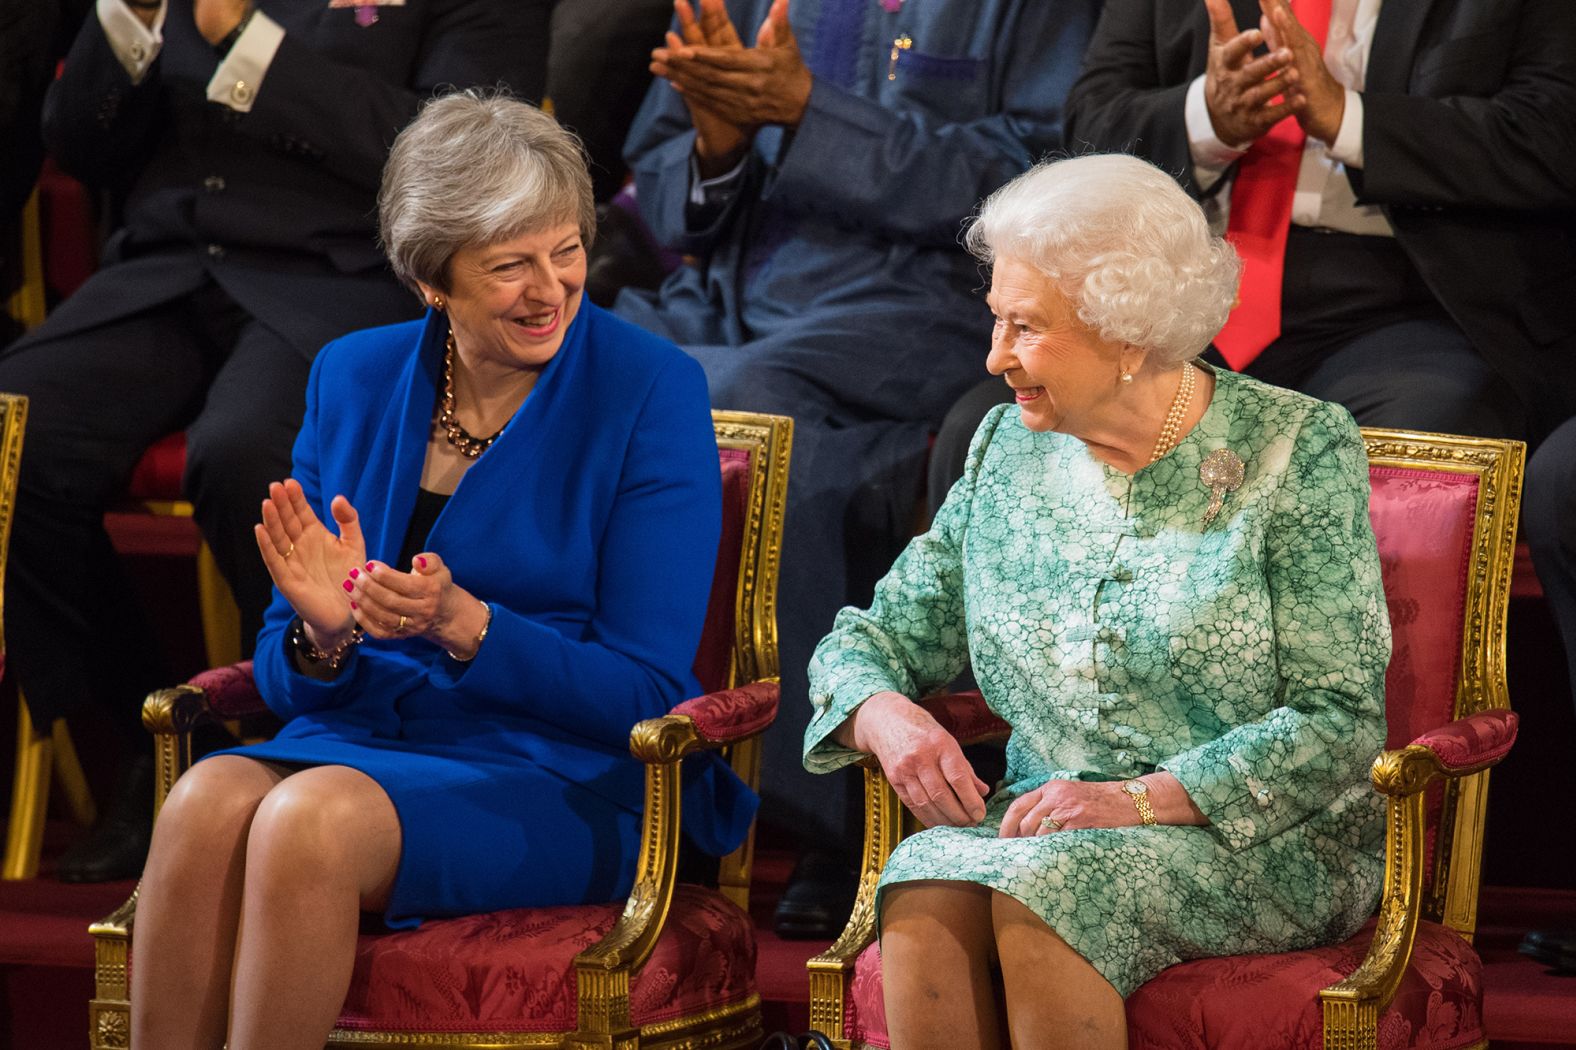 <strong>Theresa May (2016-2019):</strong> Following Cameron's resignation, May became the UK's second female prime minister. Not a lot is publicly known about their personal relationship, but the pair reportedly built up a strong rapport over the three years May was in office. Addressing the media ahead of tendering her notice to the Queen, May <a href="index.php?page=&url=https%3A%2F%2Fwww.cnn.com%2Fvideos%2Fworld%2F2019%2F07%2F24%2Ftheresa-may-final-speech-prime-minister-uk-sot-vpx.cnn" target="_blank">described serving as PM</a> as "the greatest honor." 